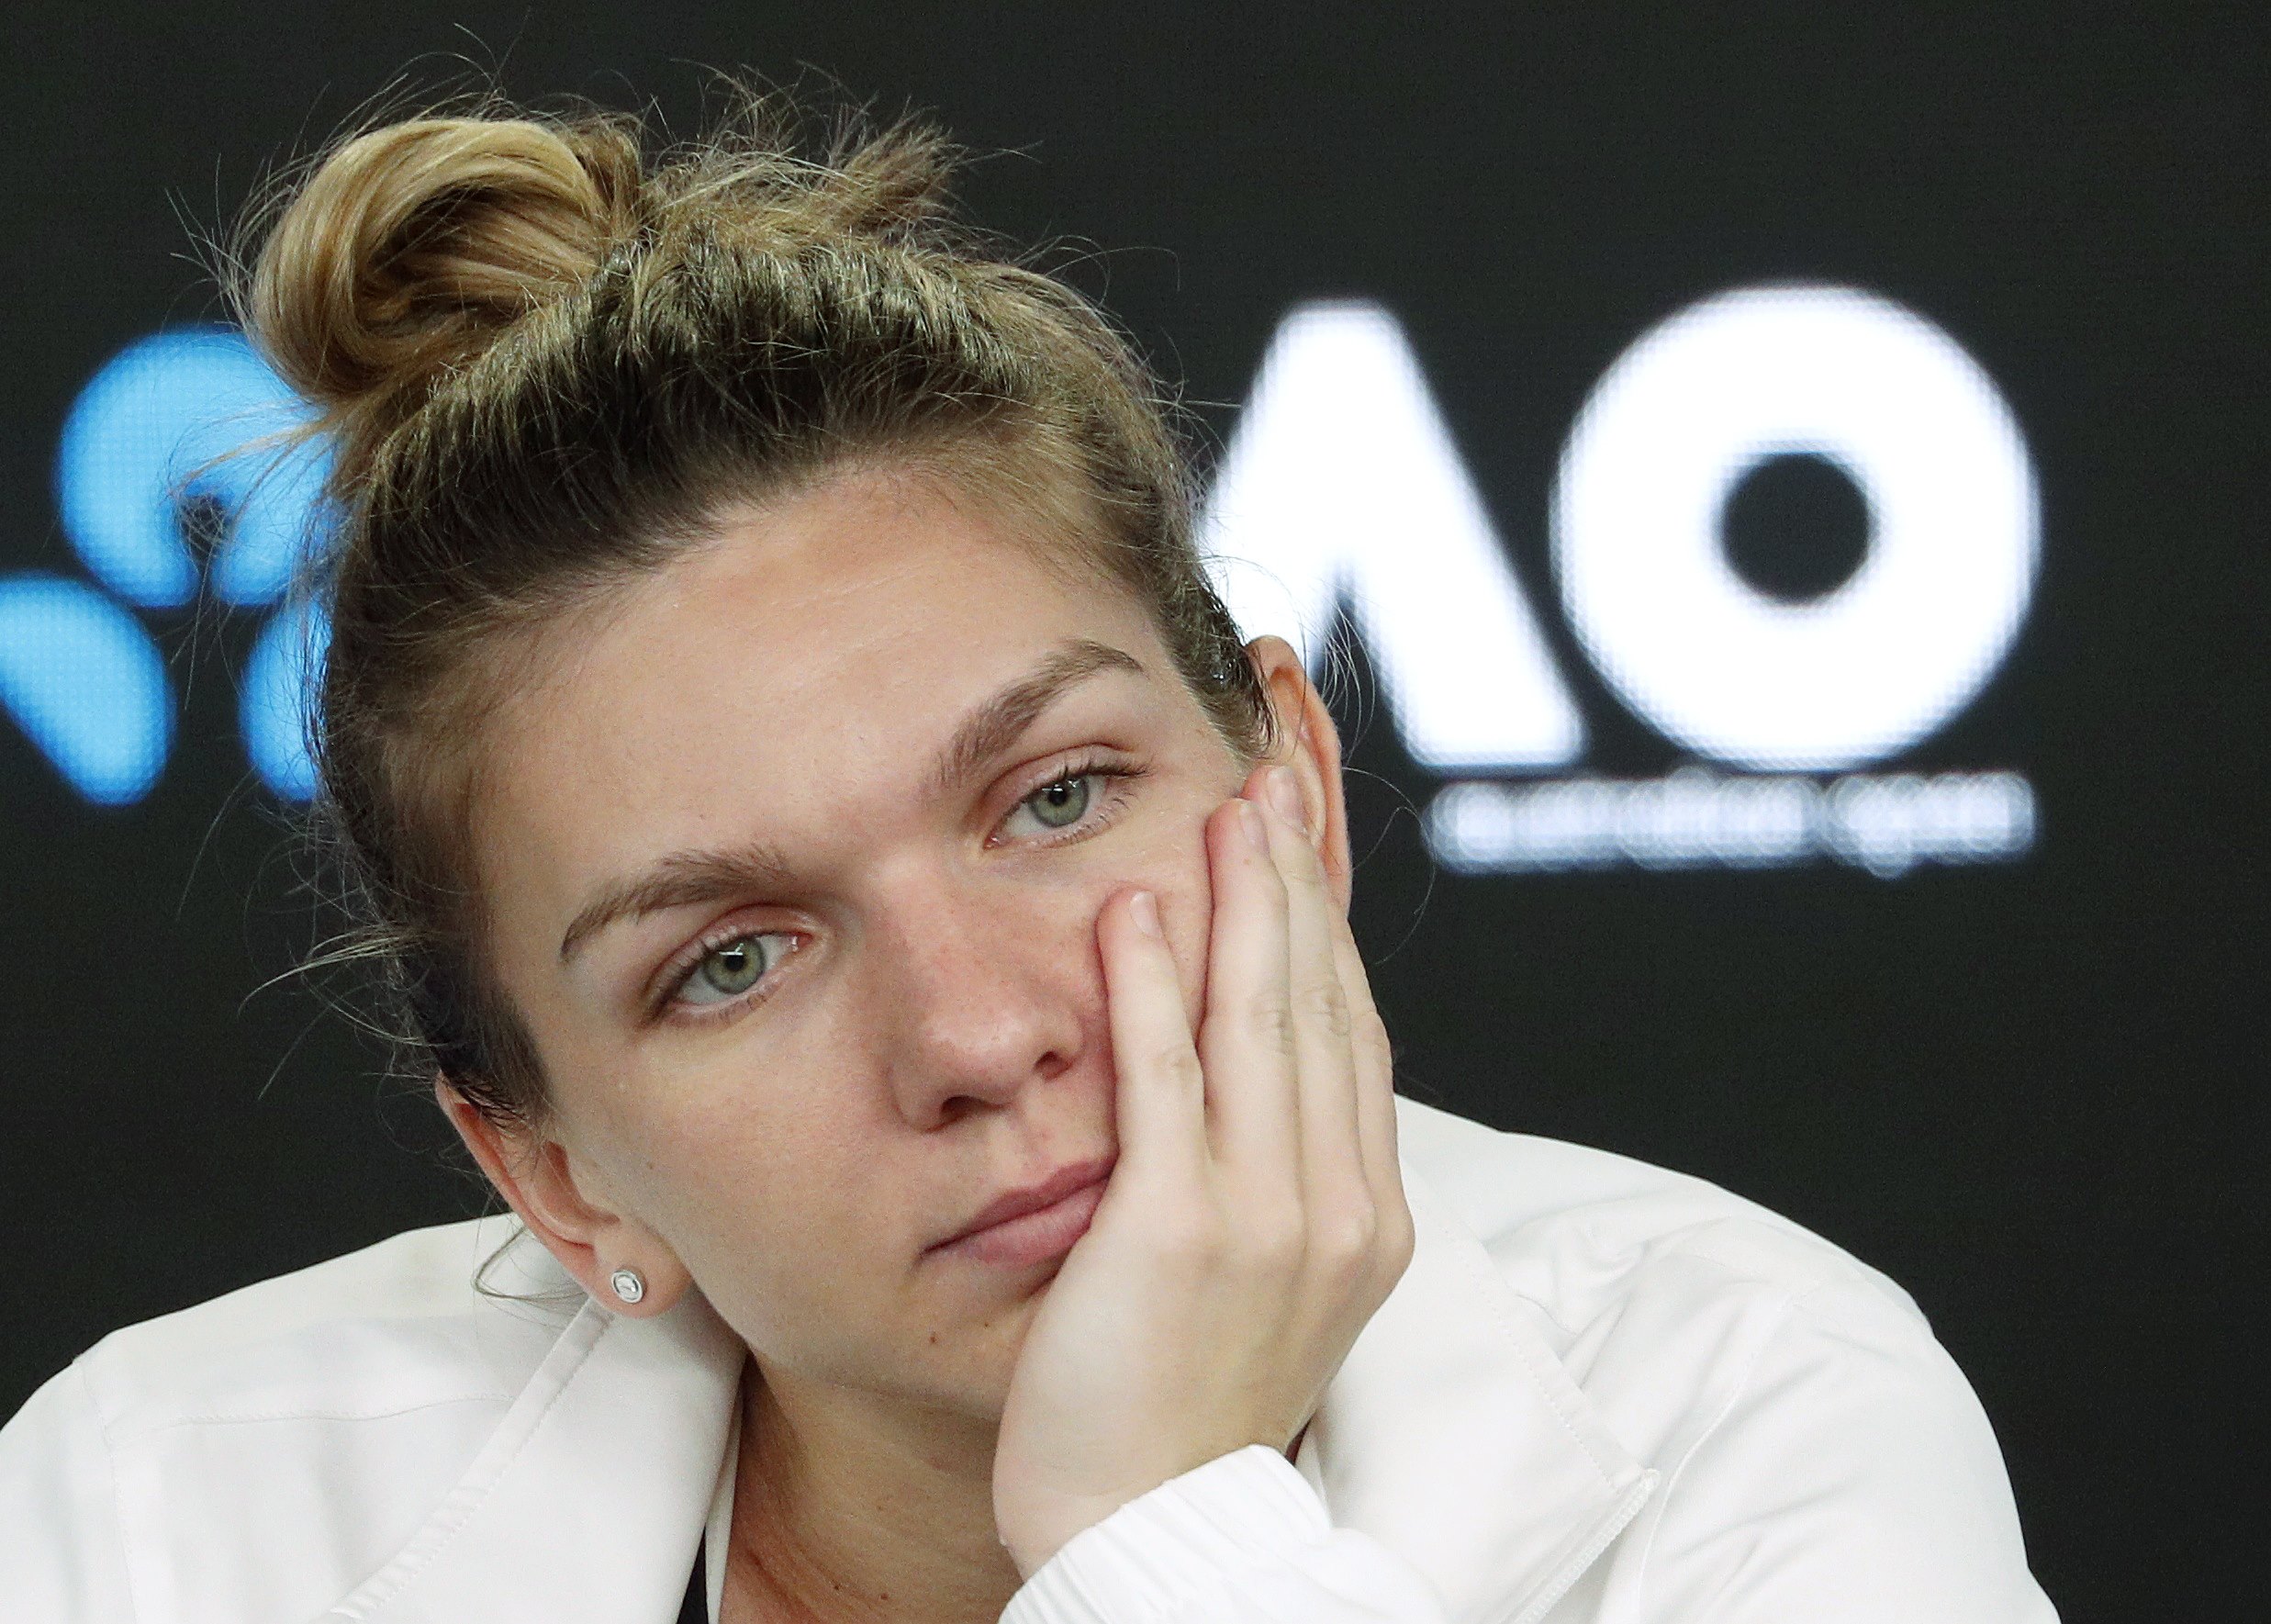 Tennis: No escapes for brave Halep in third Grand Slam final